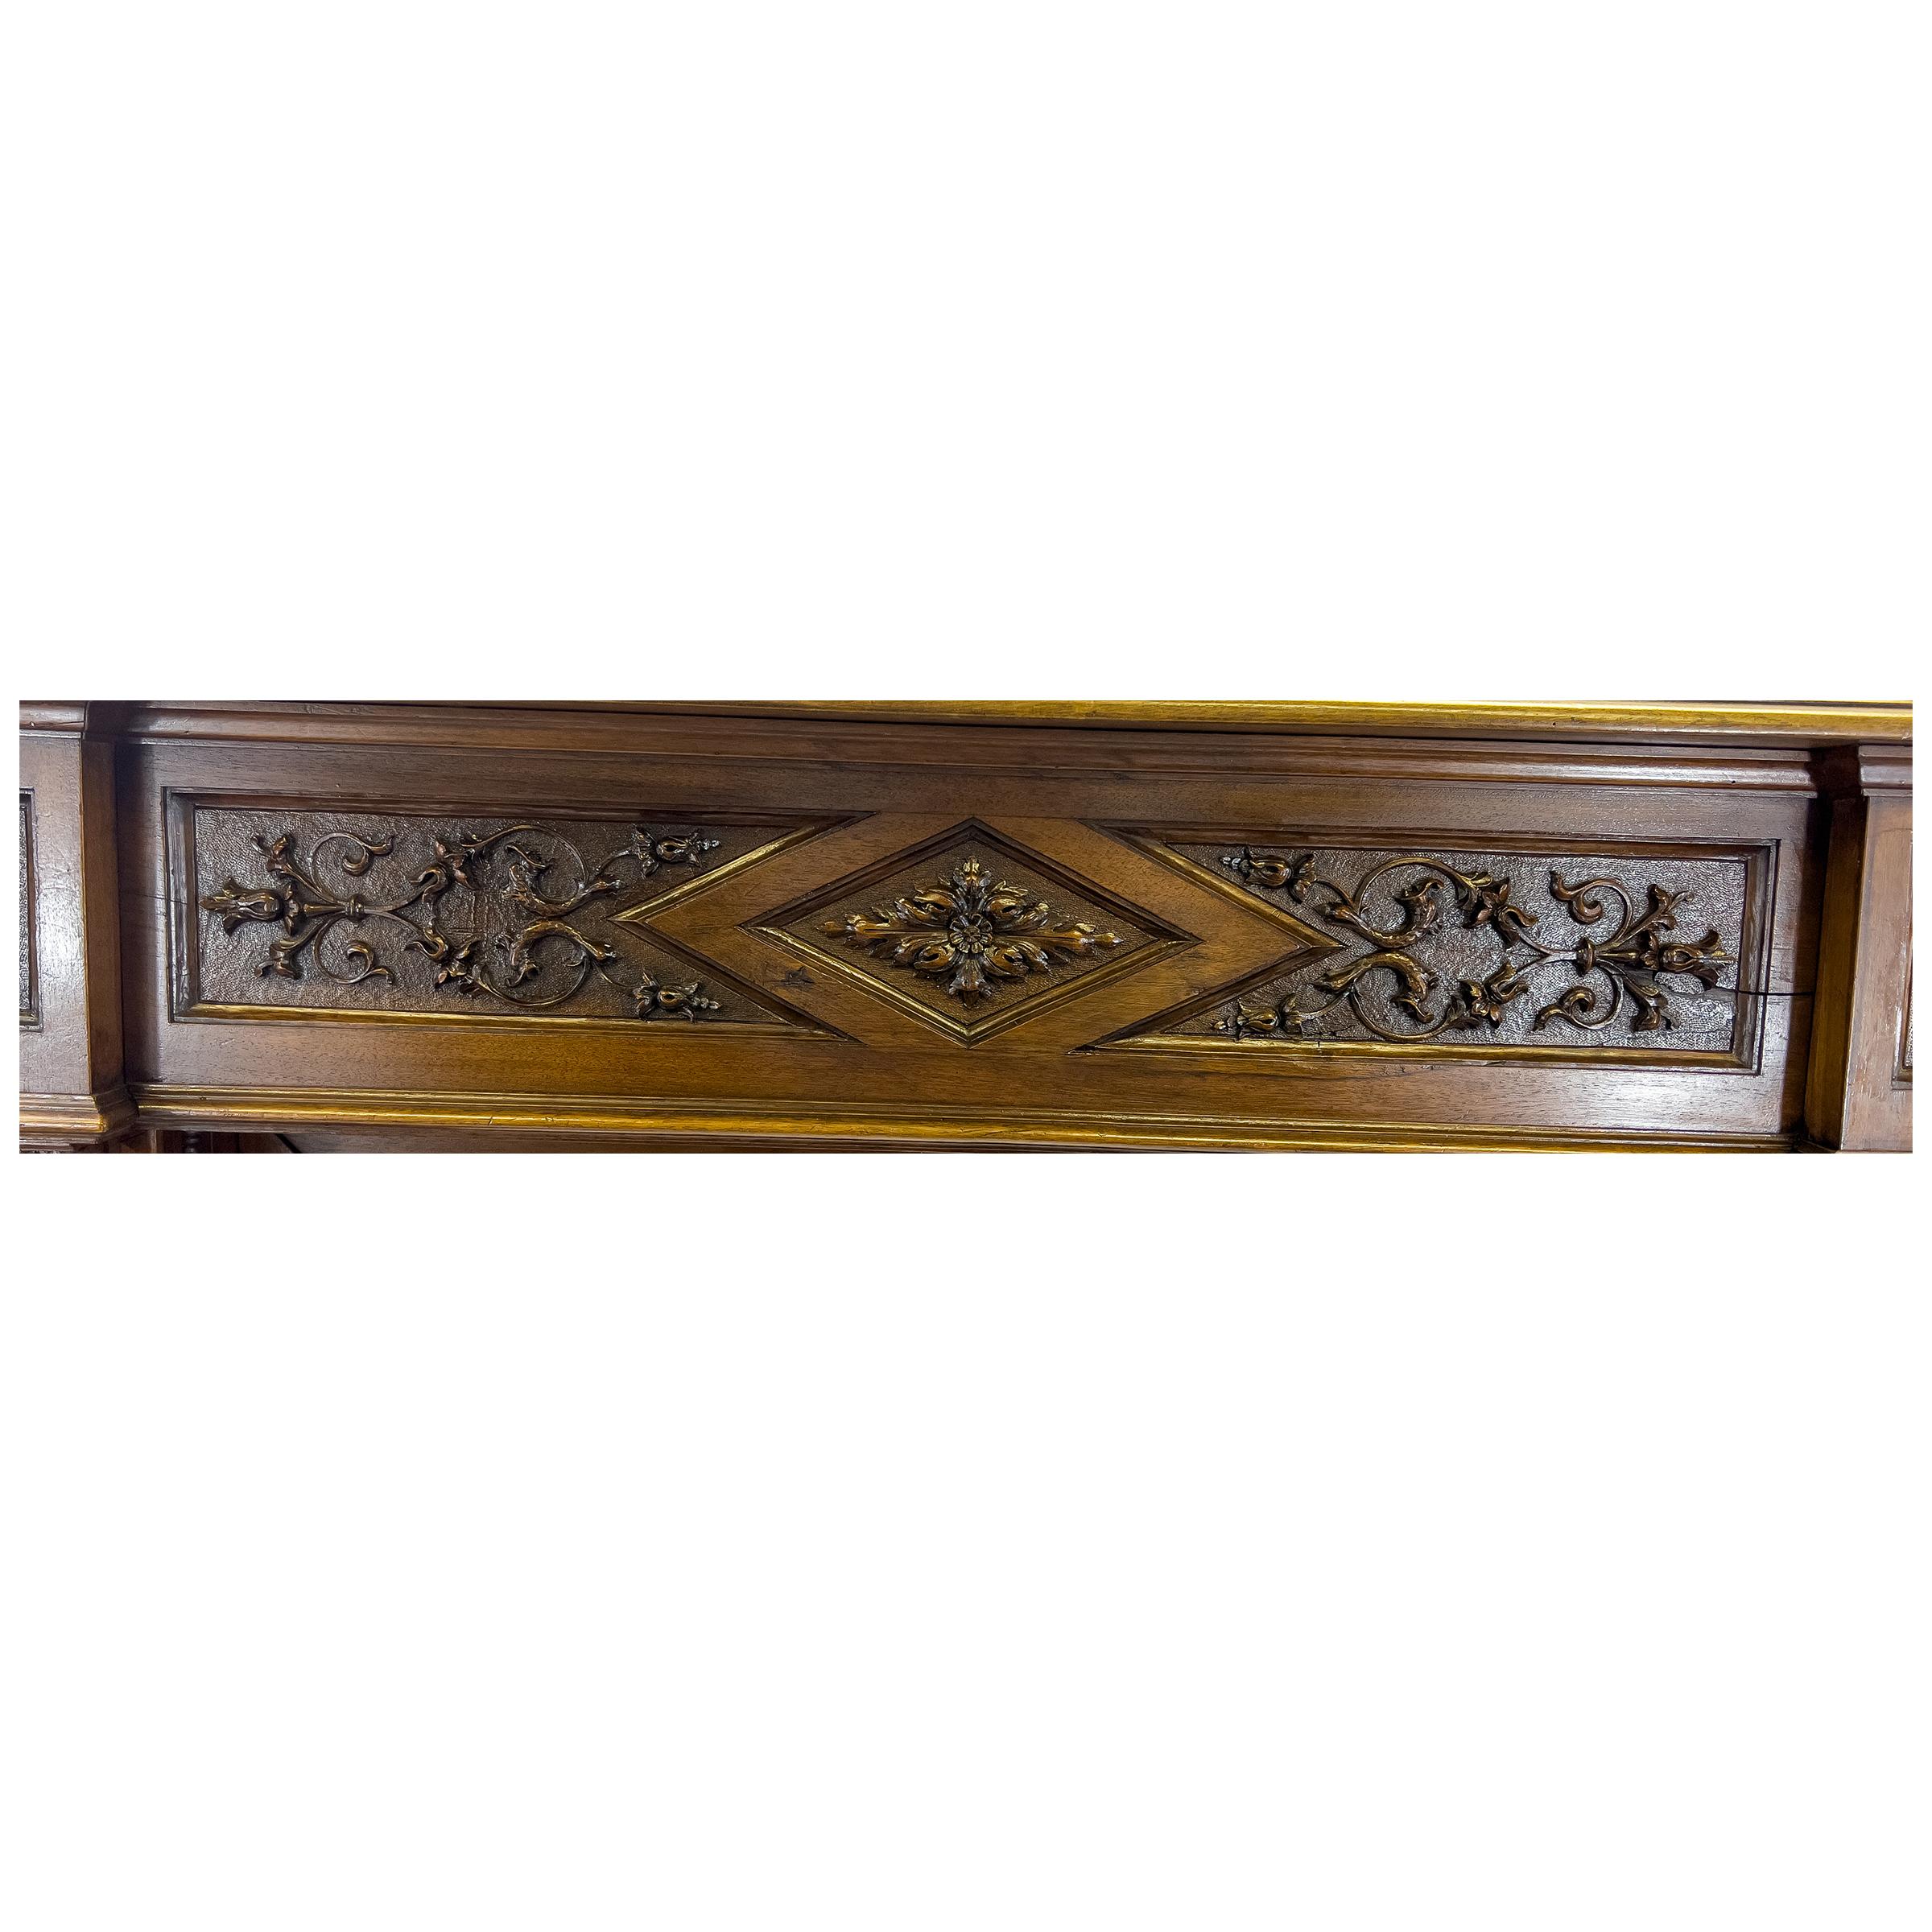 Antique Carved Wood Fireplace Mantel 1